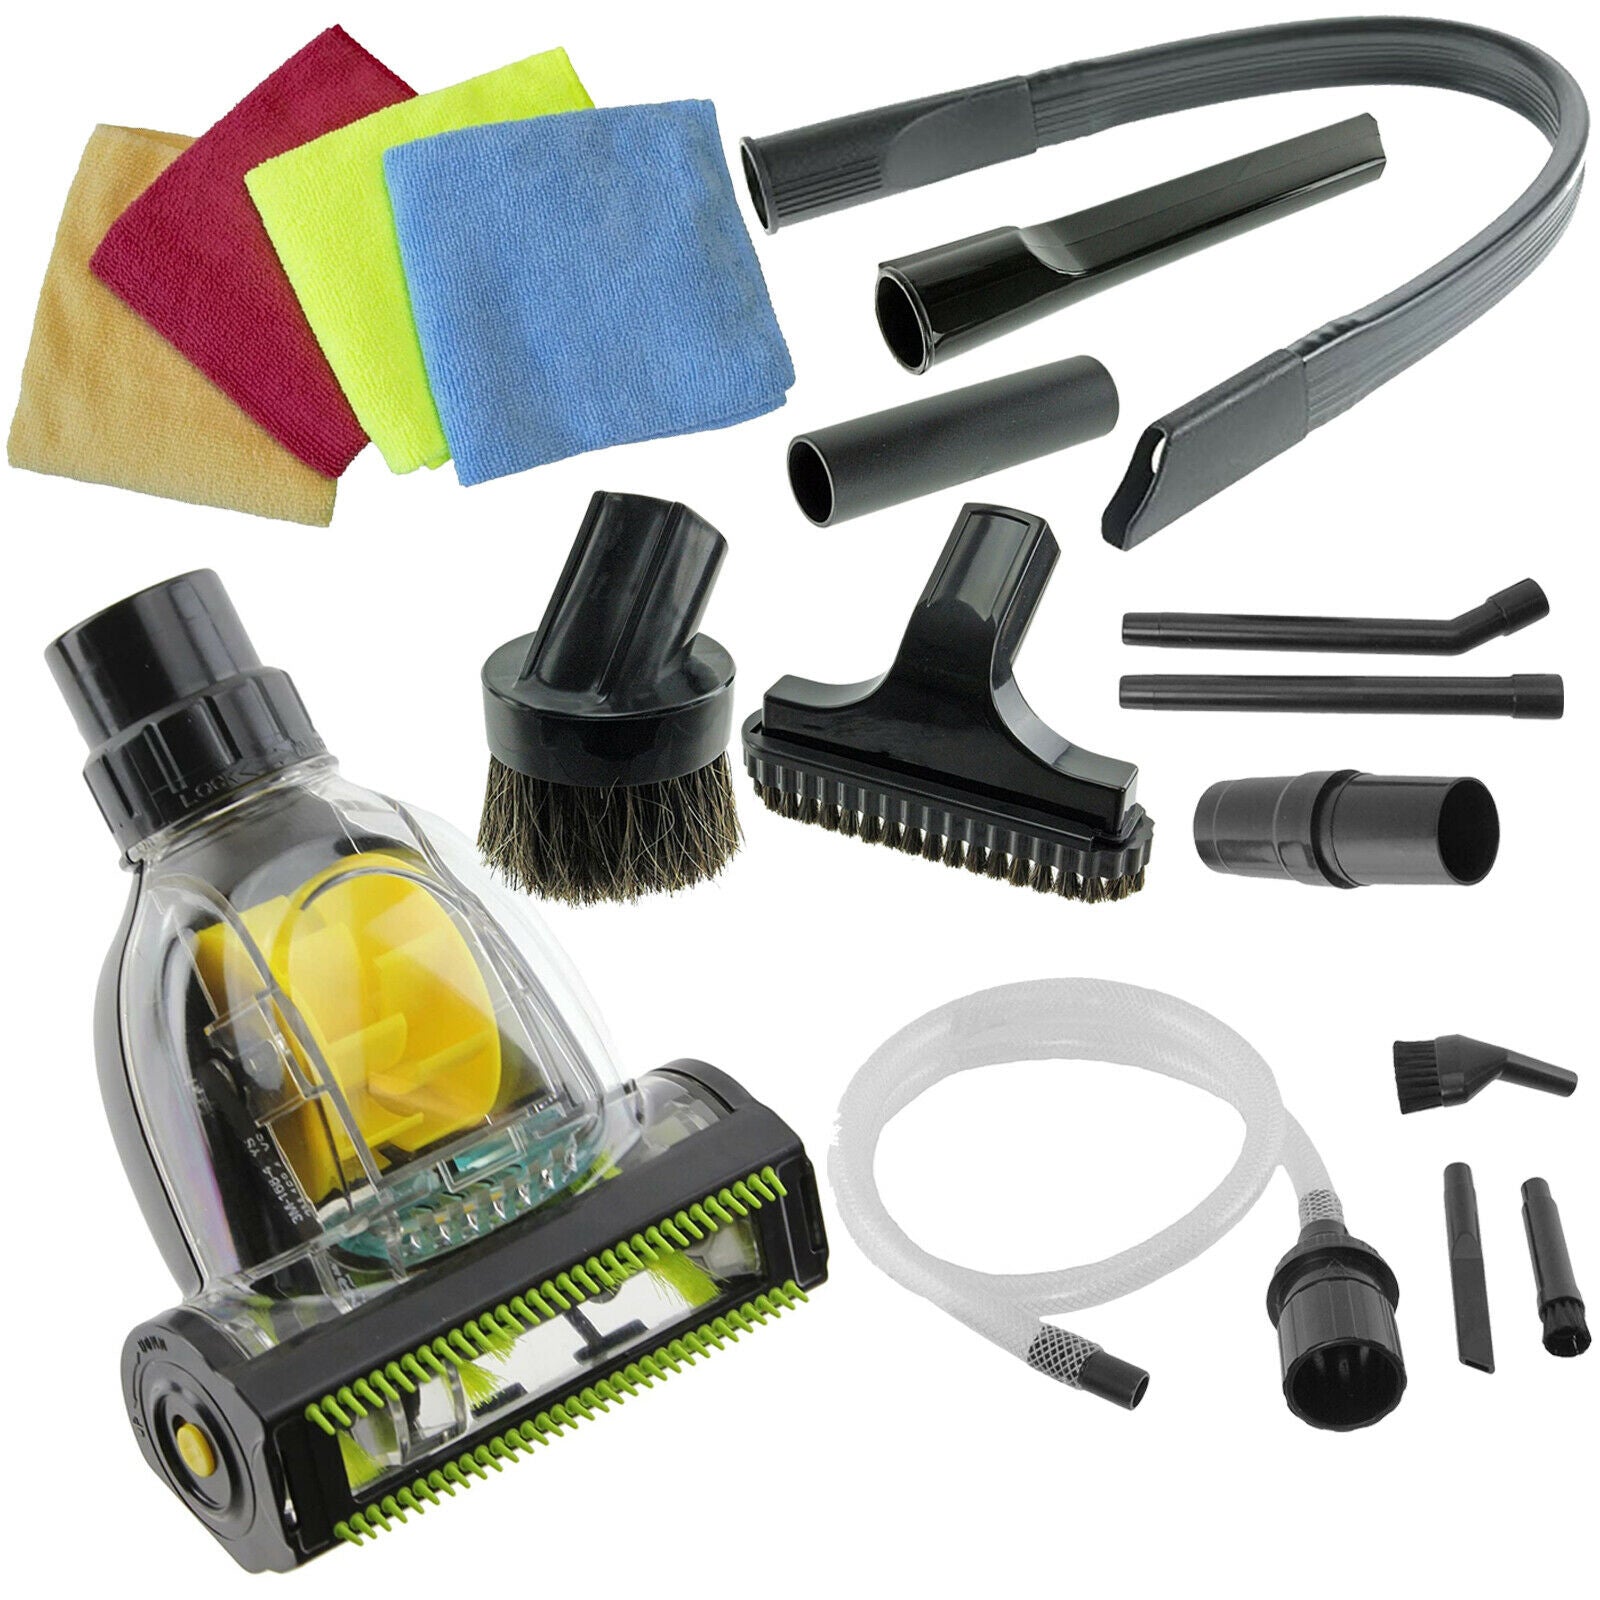 Car Detailing Complete Valet Kit with Micro Tools & Cloths compatible with HOOVER Vacuum Cleaner (32mm)